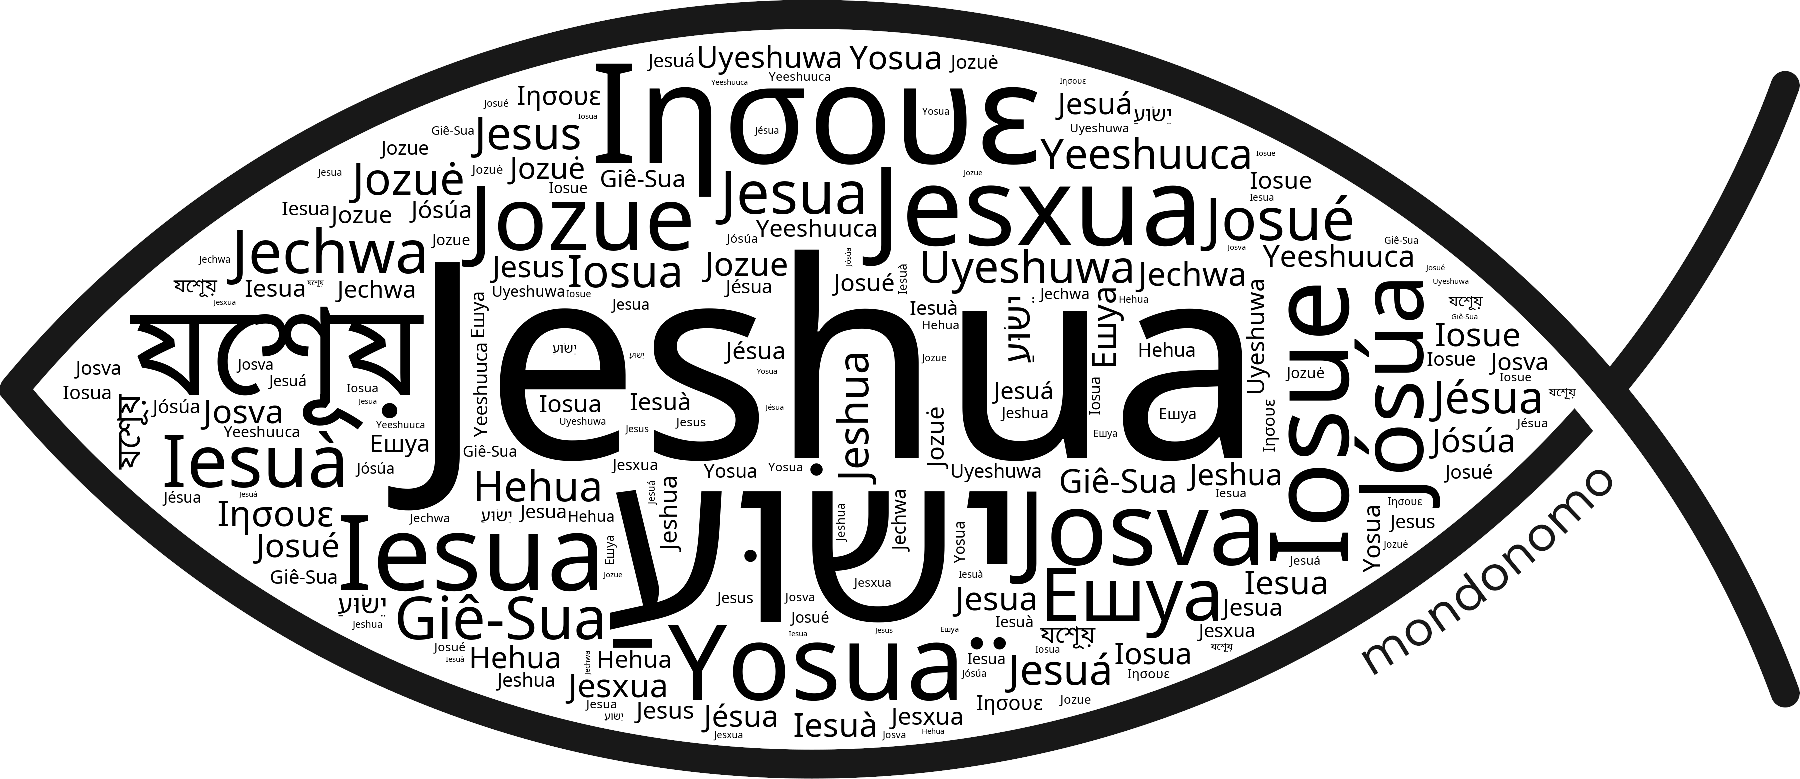 Name Jeshua in the world's Bibles